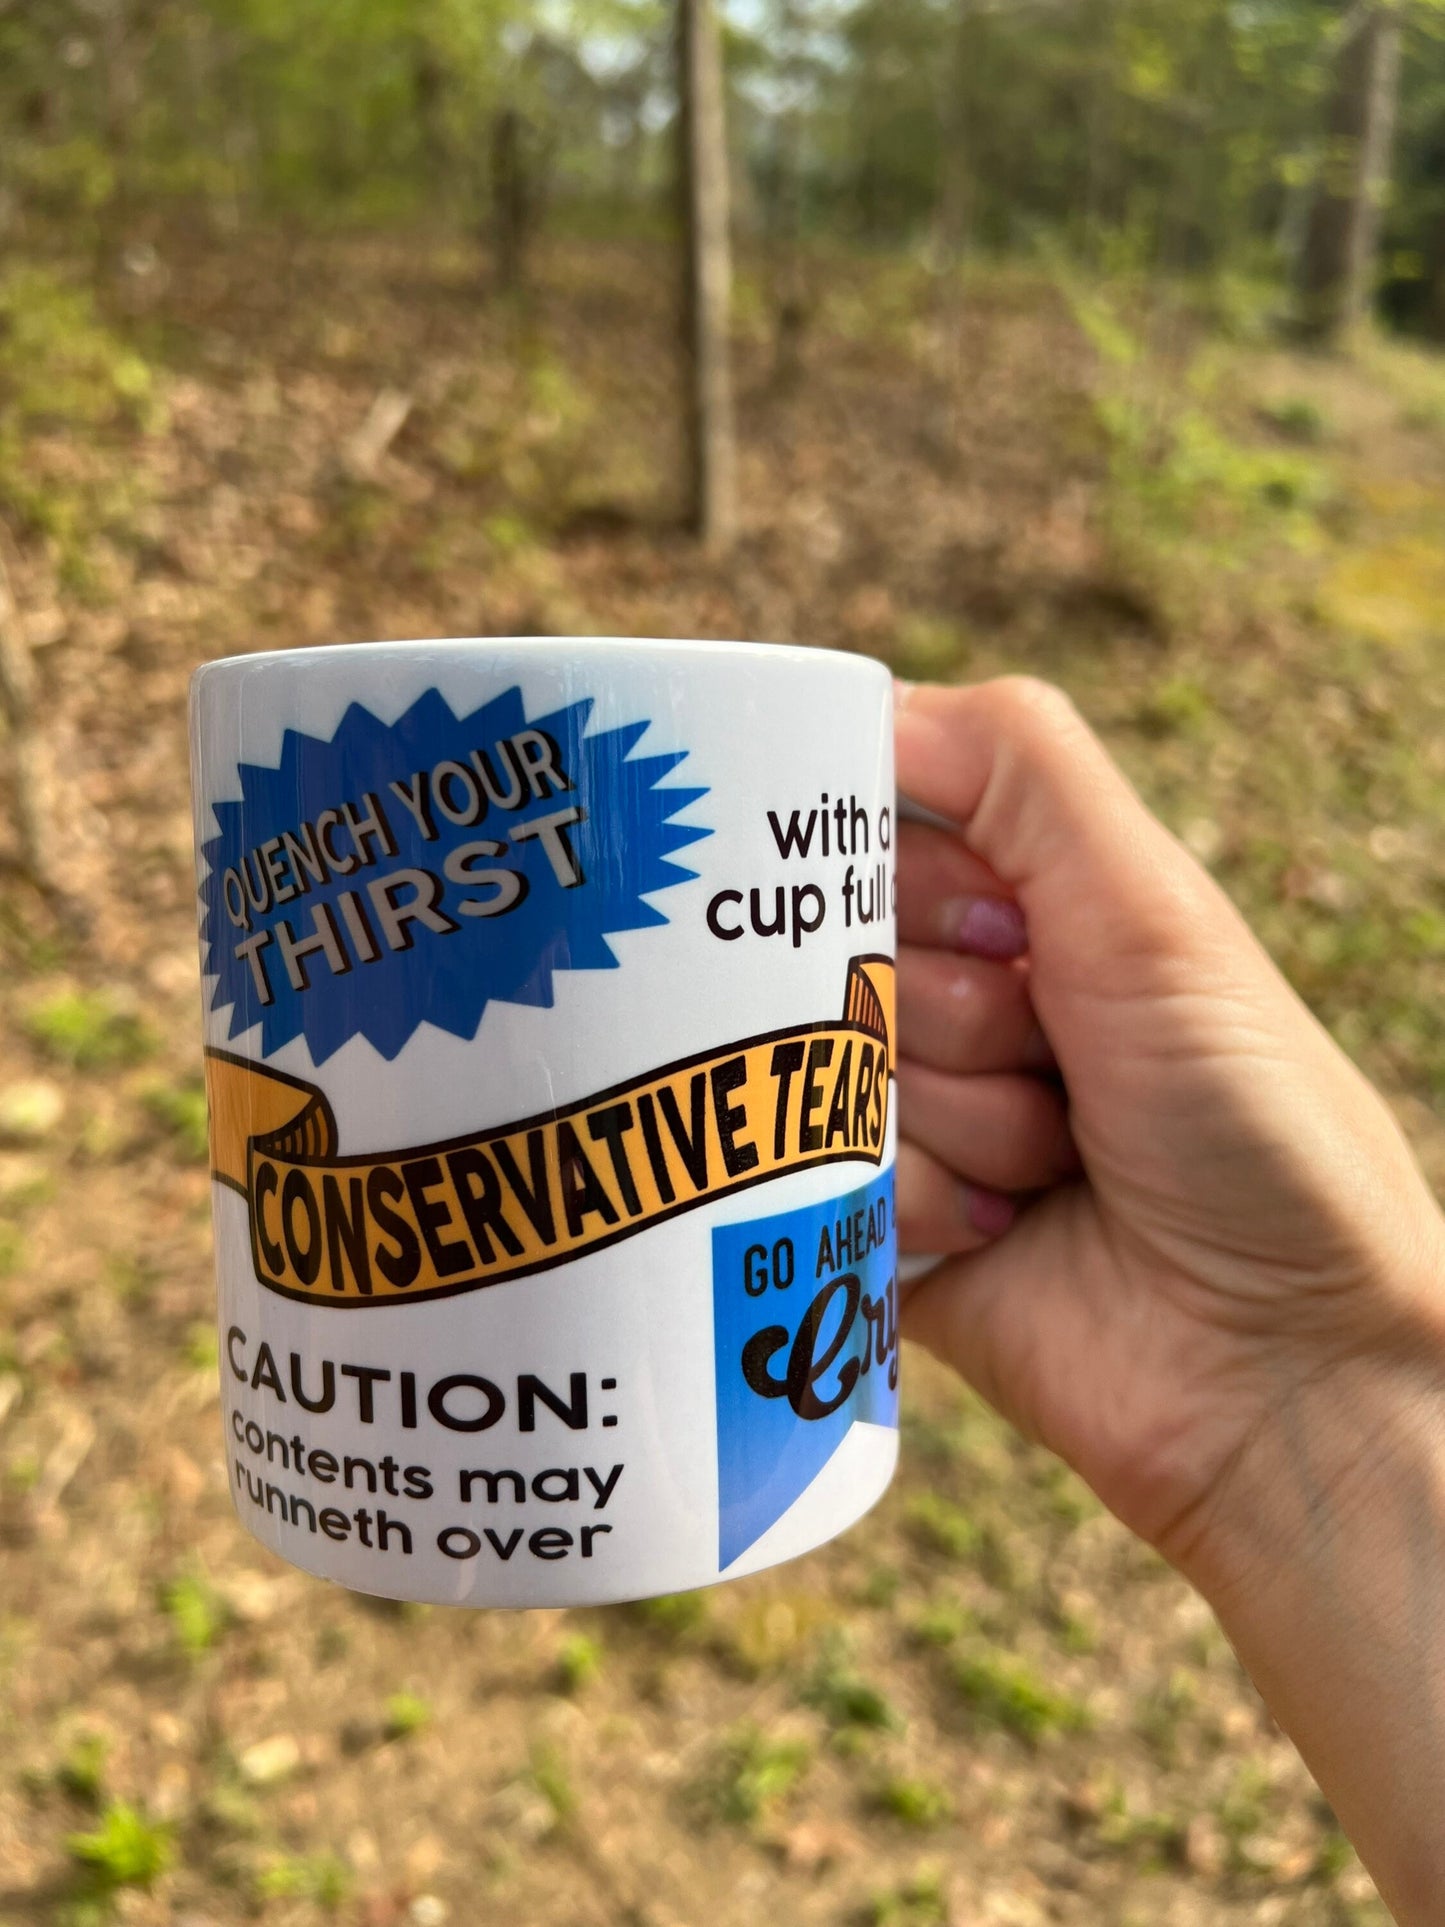 Conservative Tears Mug - Caution: contents may runneth over